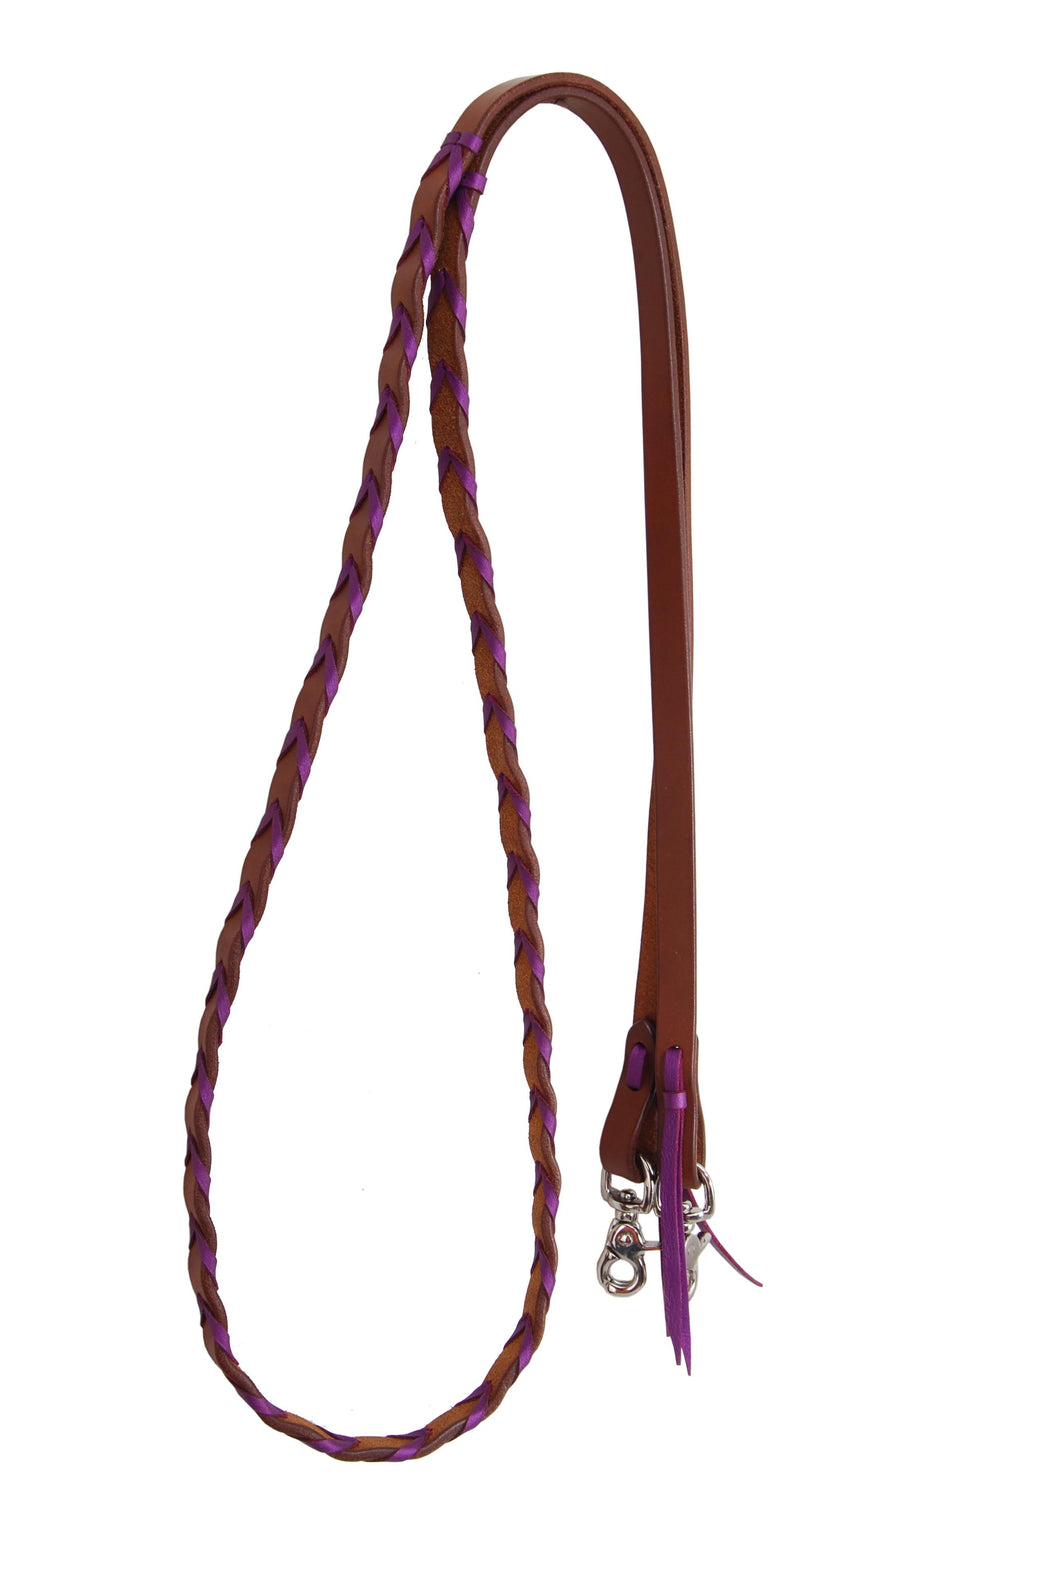 Rafter T Ranch Co. Leather Laced Barrel Reins-Purple